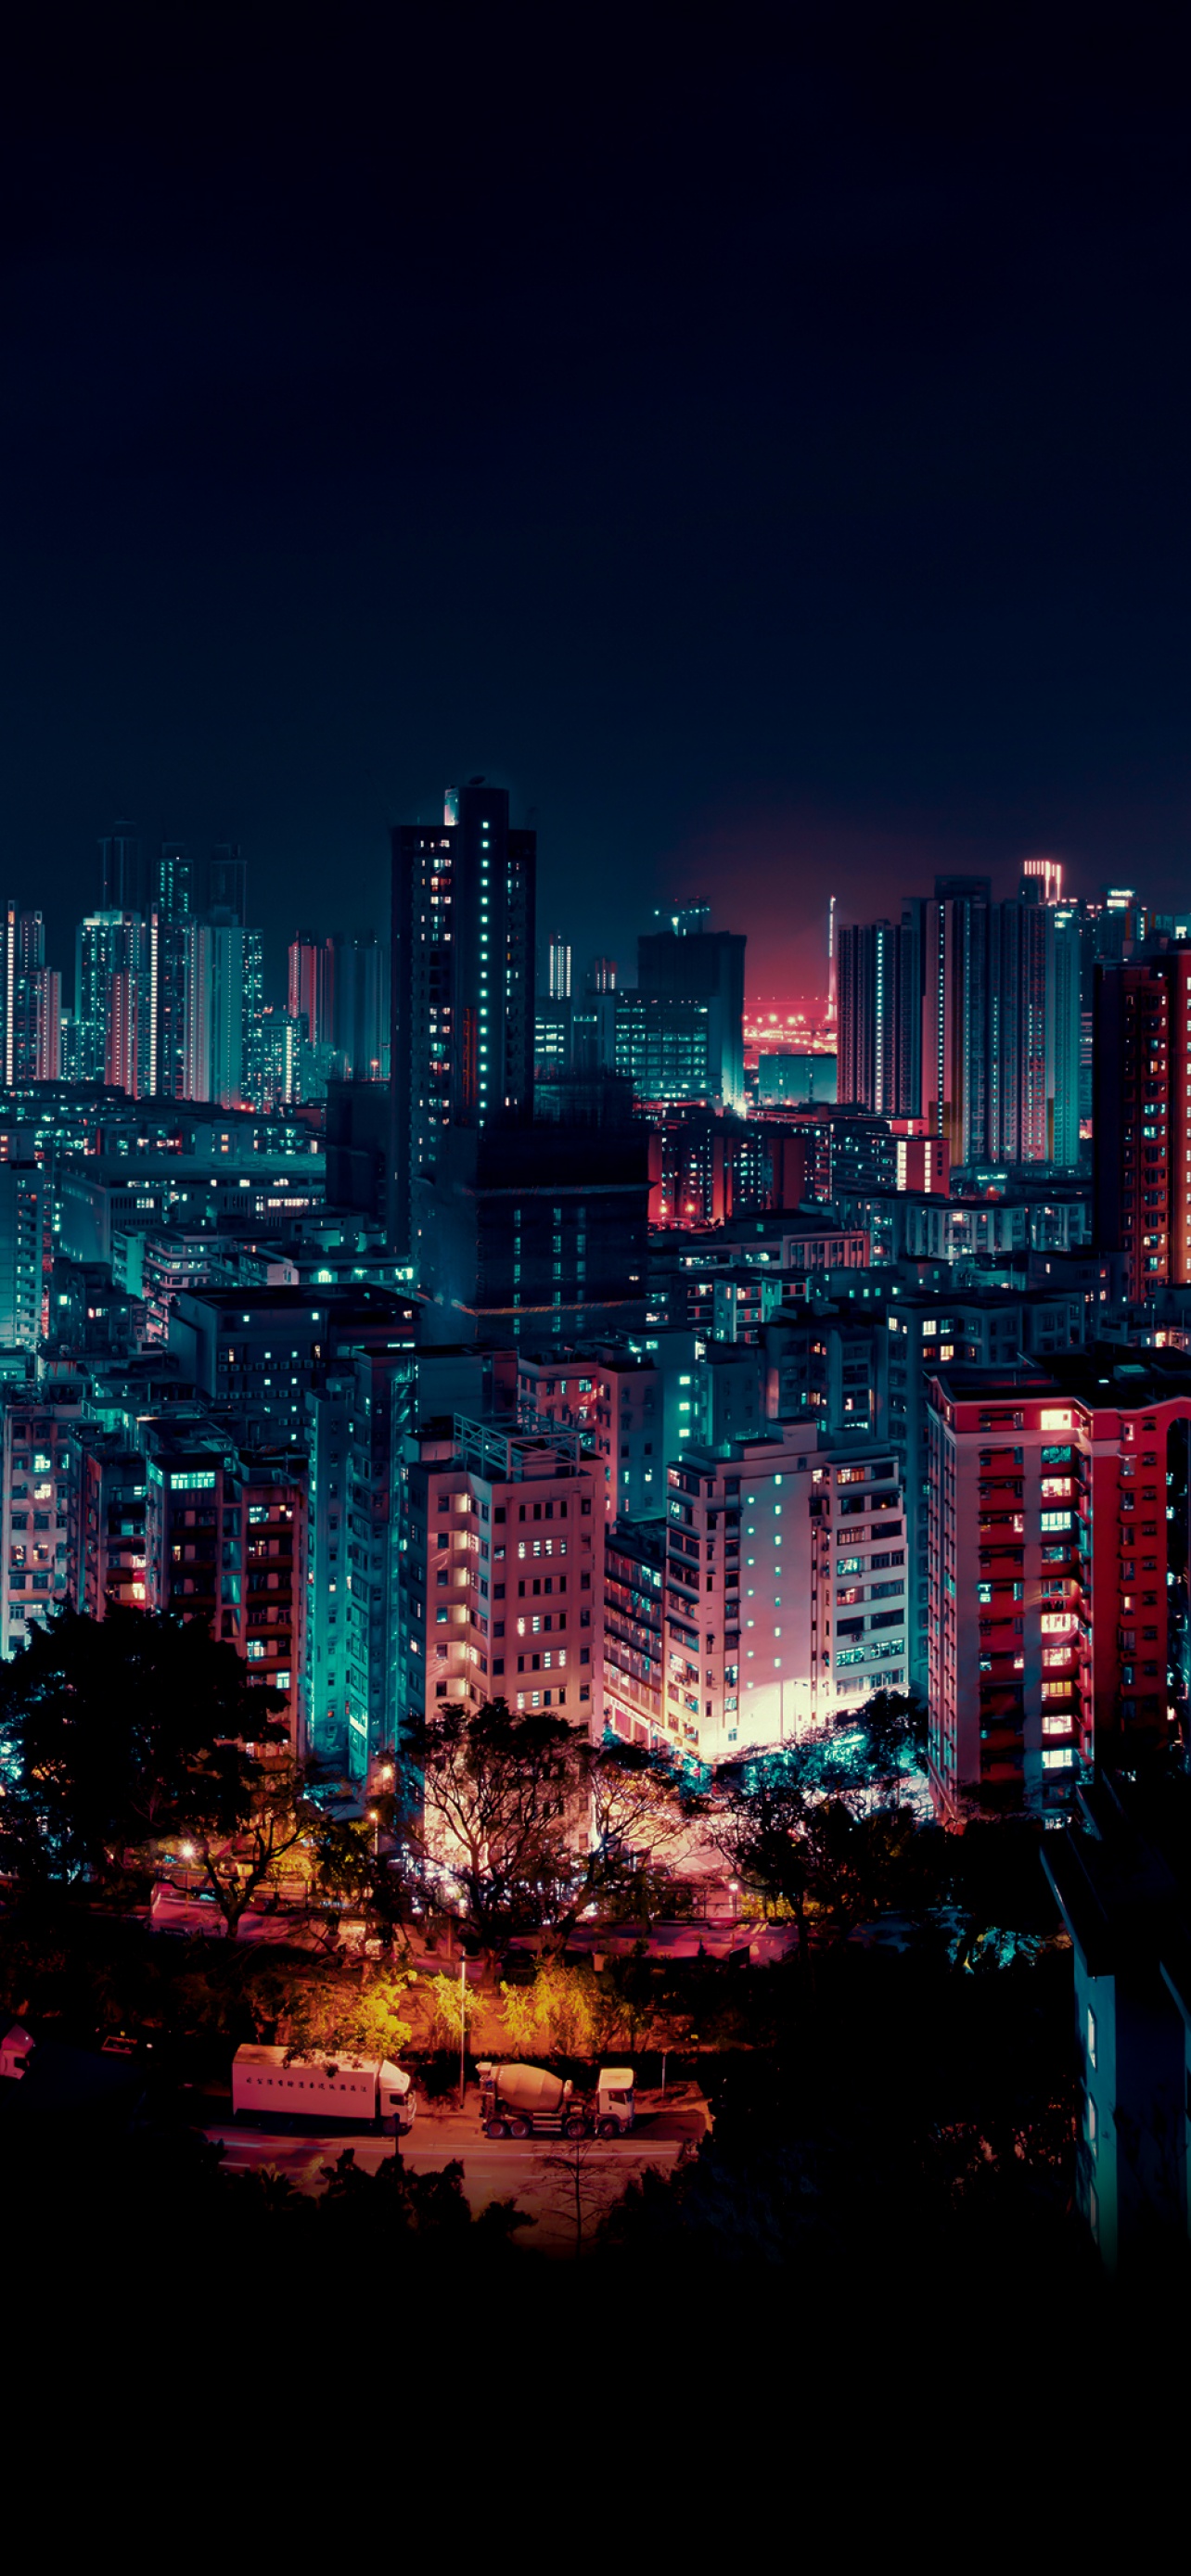 city lights at nighttime iPhone Wallpapers Free Download